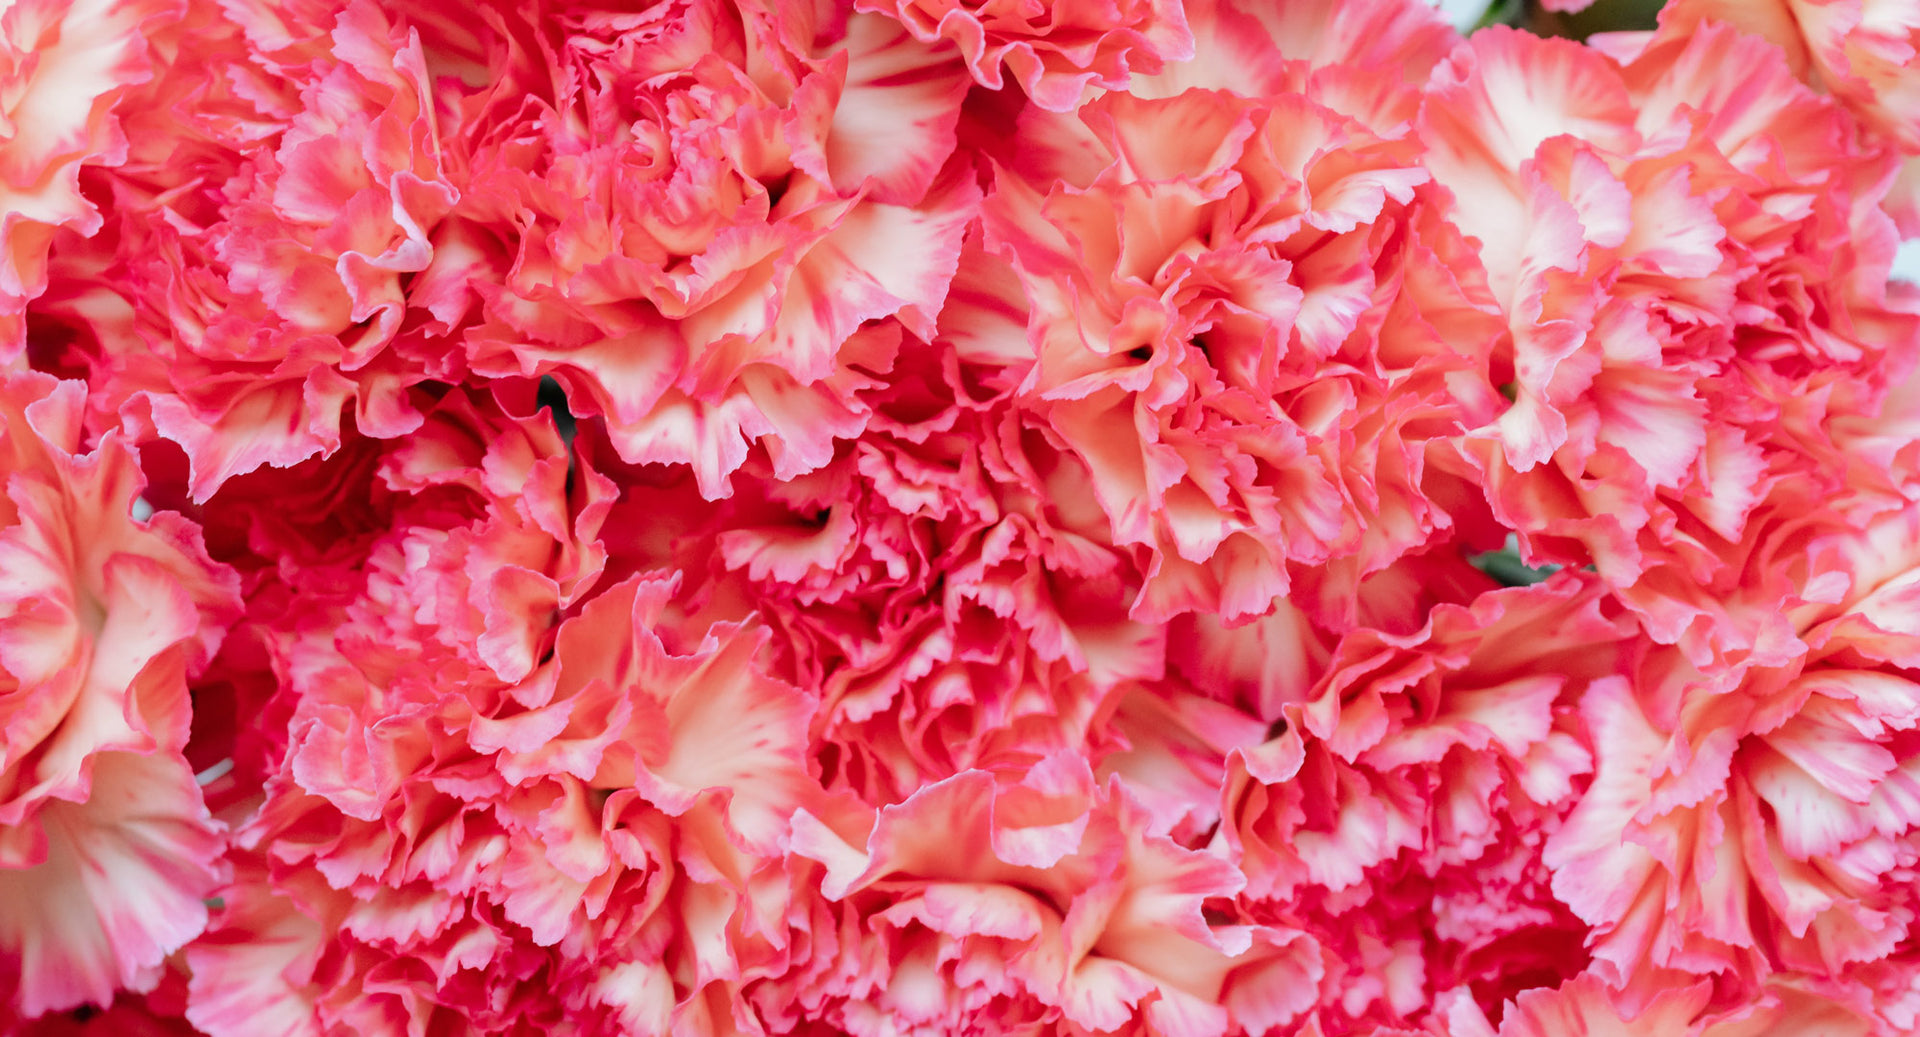 Hot pink red carnations by post